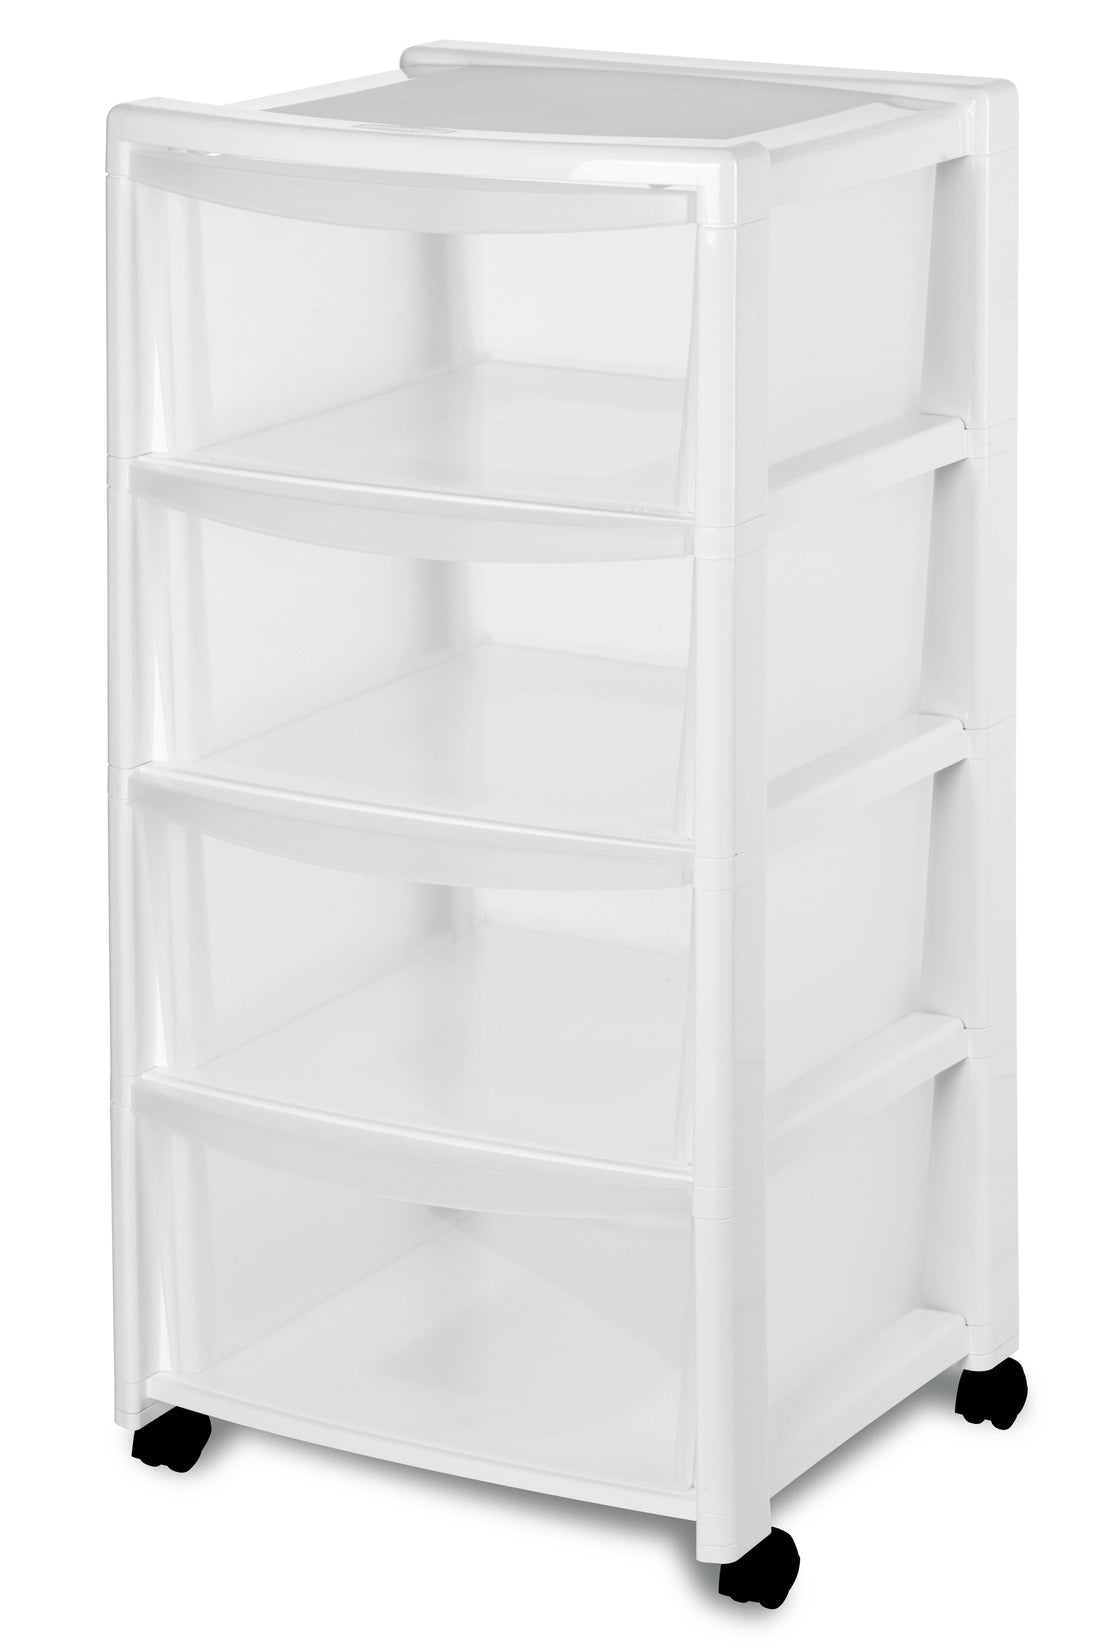 WHITE CABINET 4 TRANSPARENT DRAWERS H80xW40xD40CM PLASTIC CABINET WITH WHEELS